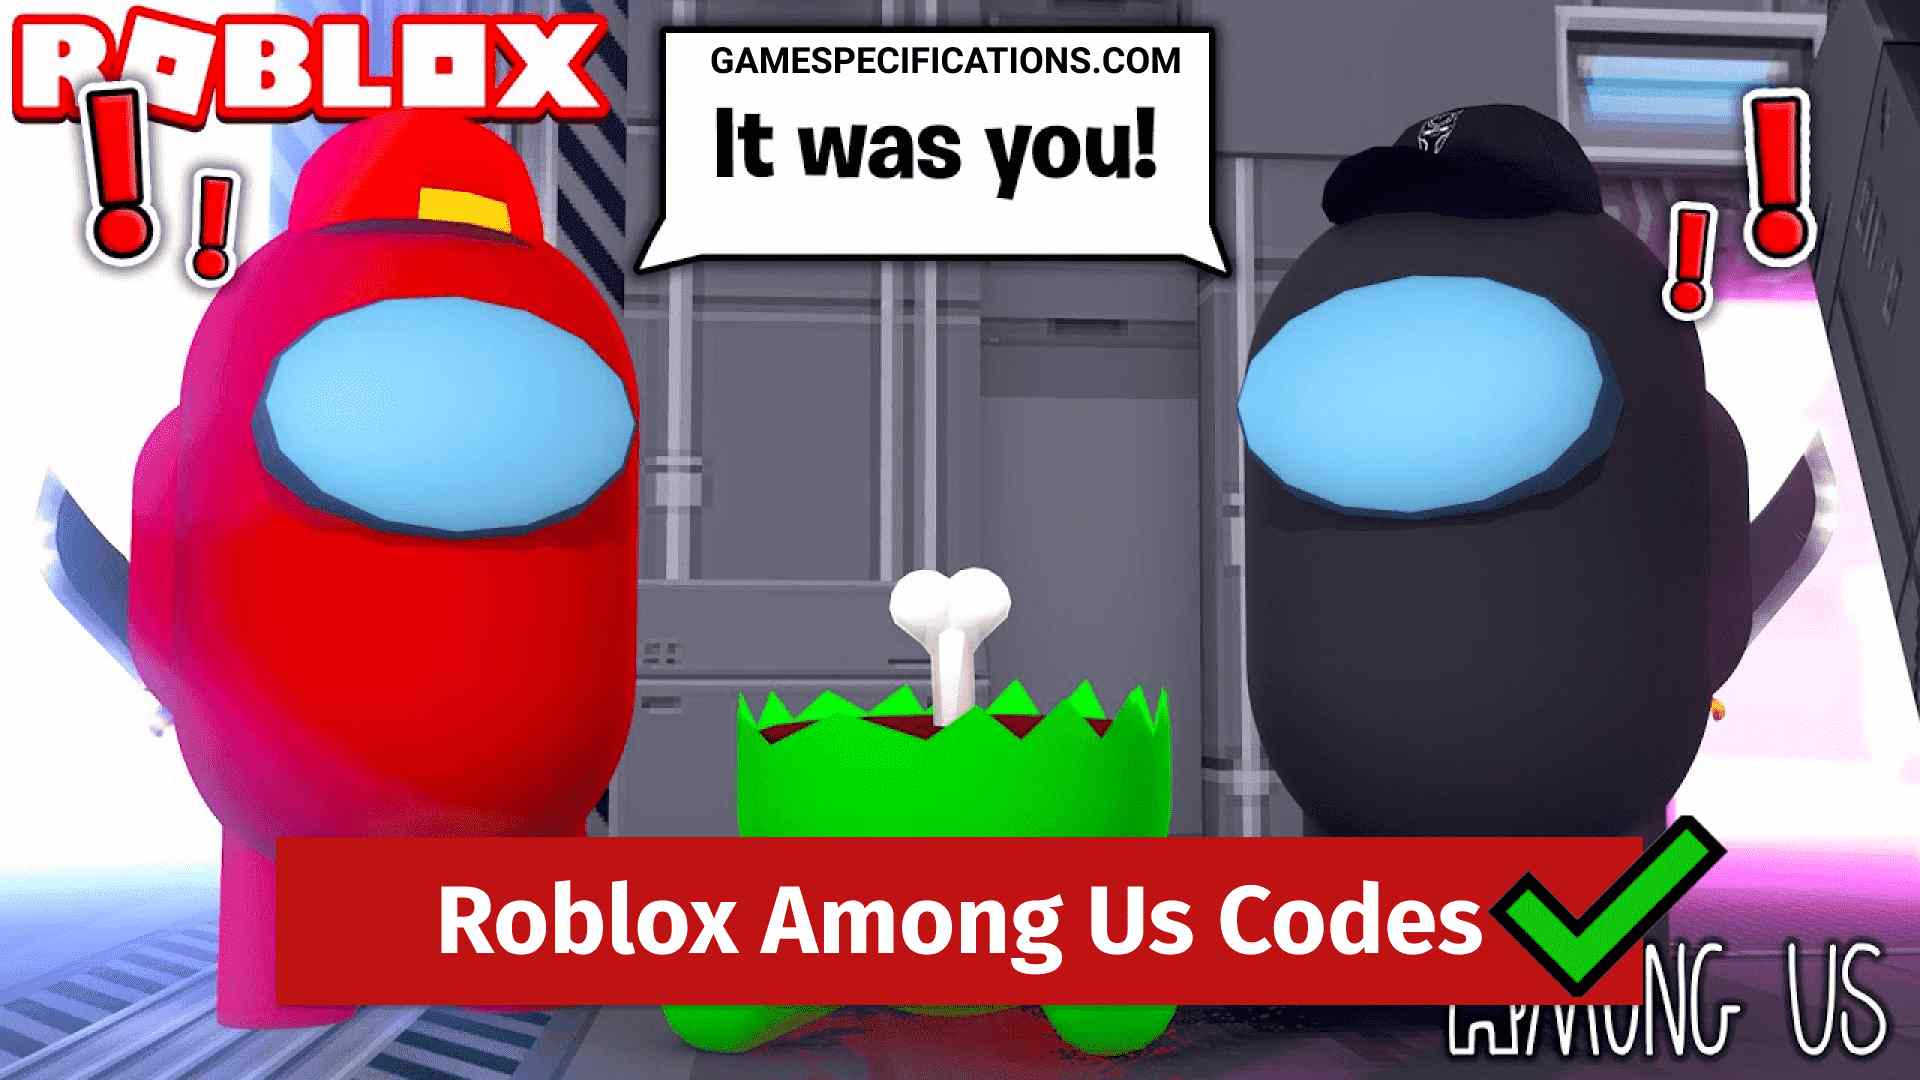 3 Roblox Among Us Codes For Free Pets [August 2022] - Game Specifications